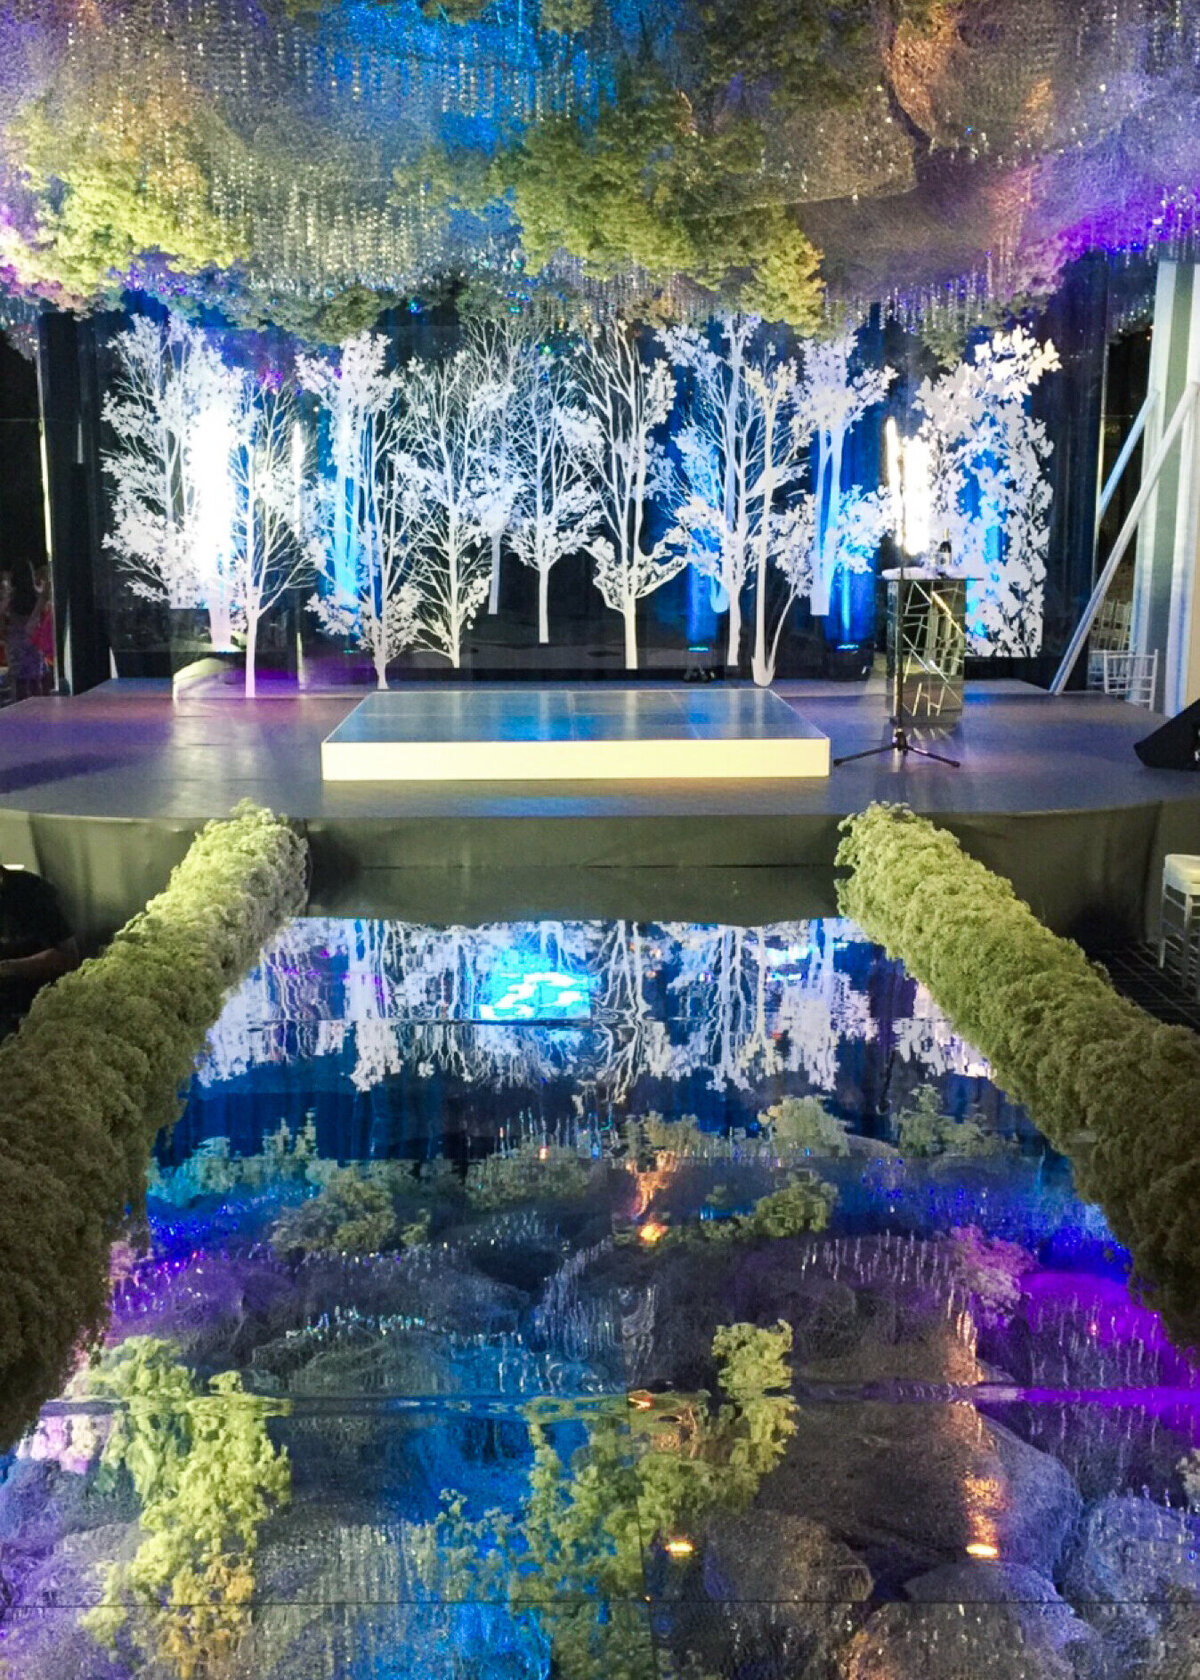 A mirrored wedding aisle or brand event stage planned by a celebrity event planner